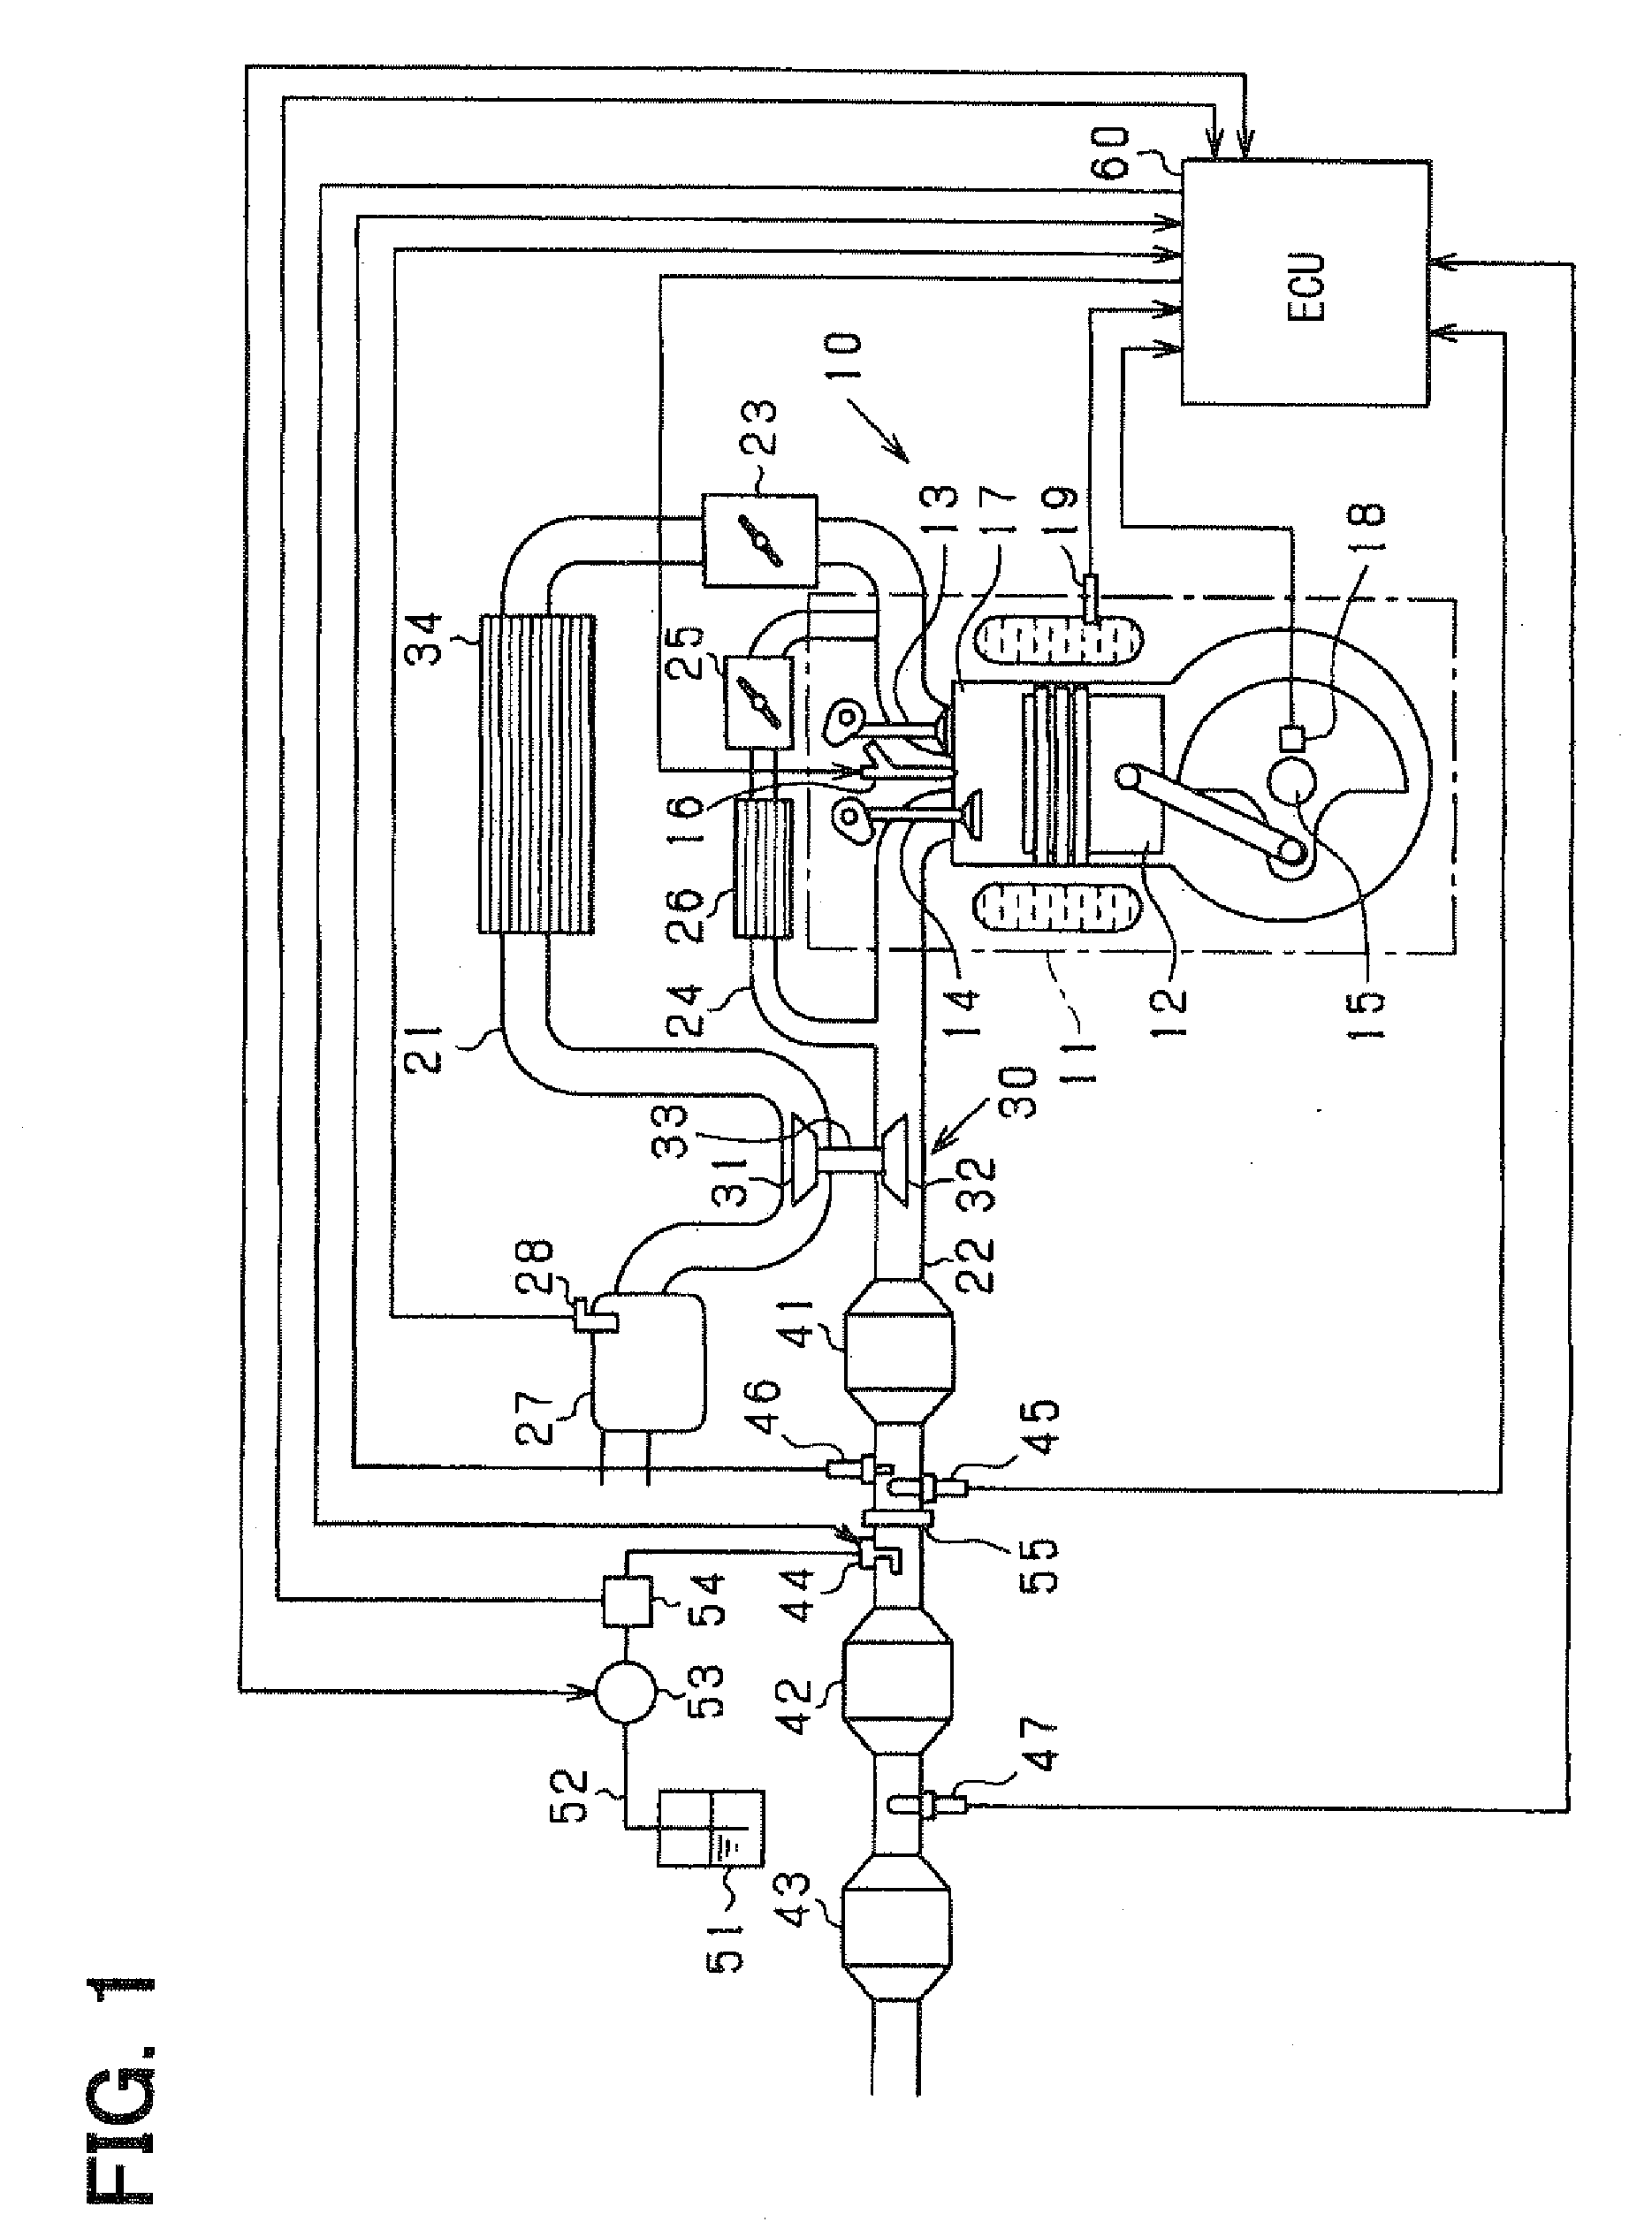 Exhaust-gas purification apparatus and method for purifying exhaust gas